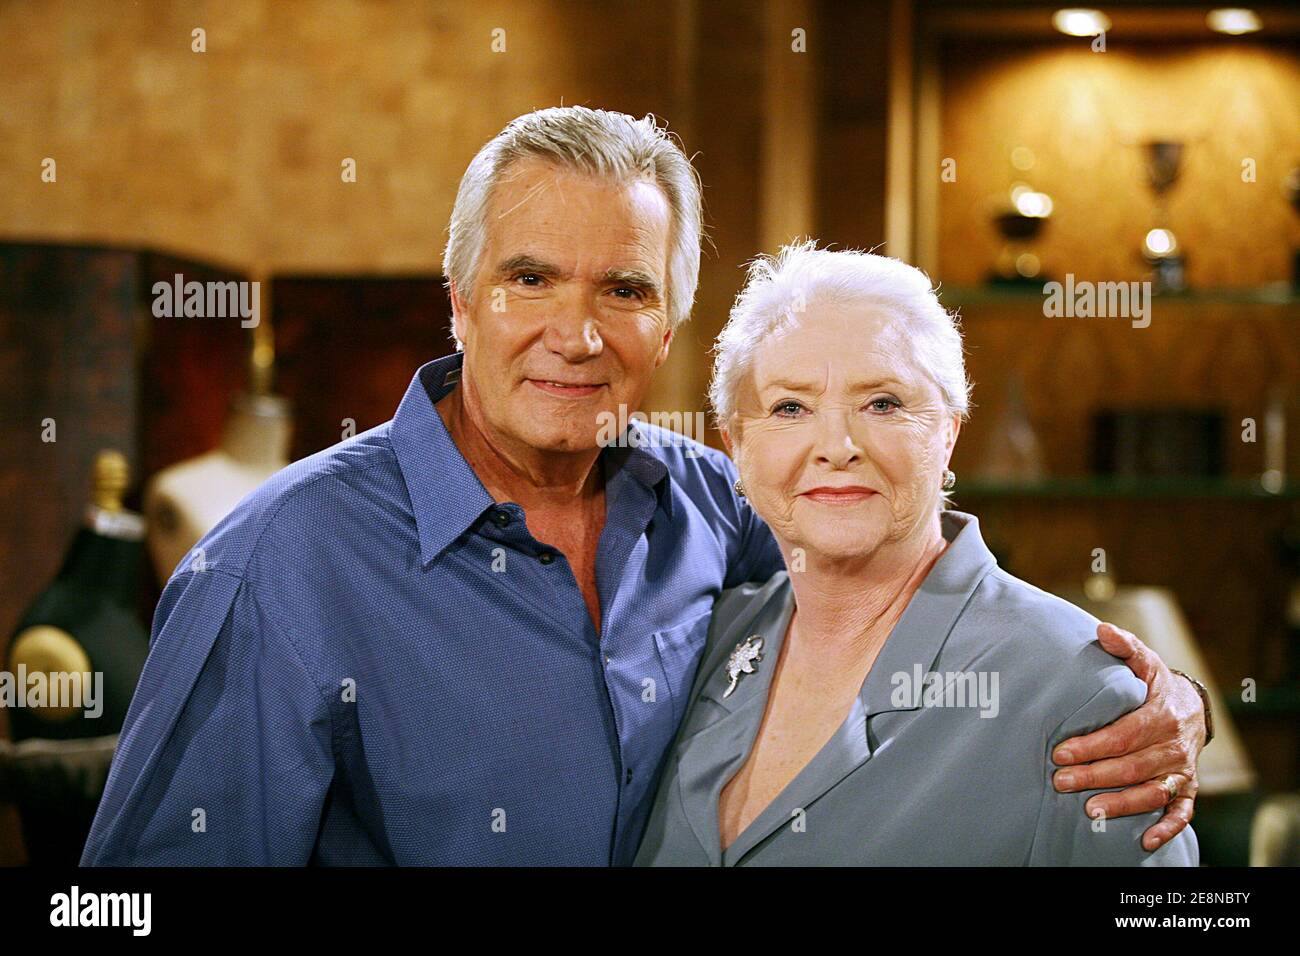 EXCLUSIVE. BEHIND THE SCENES : John McCook and Susan Flannery on the set of 'The Bold and the Beautiful' (Amour, gloire et beaute) on CBS studios, In Los Angeles, CA, USA, on January 10, 2007. Photo by Denis Guignebourg/ABACAPRESS.COM Stock Photo